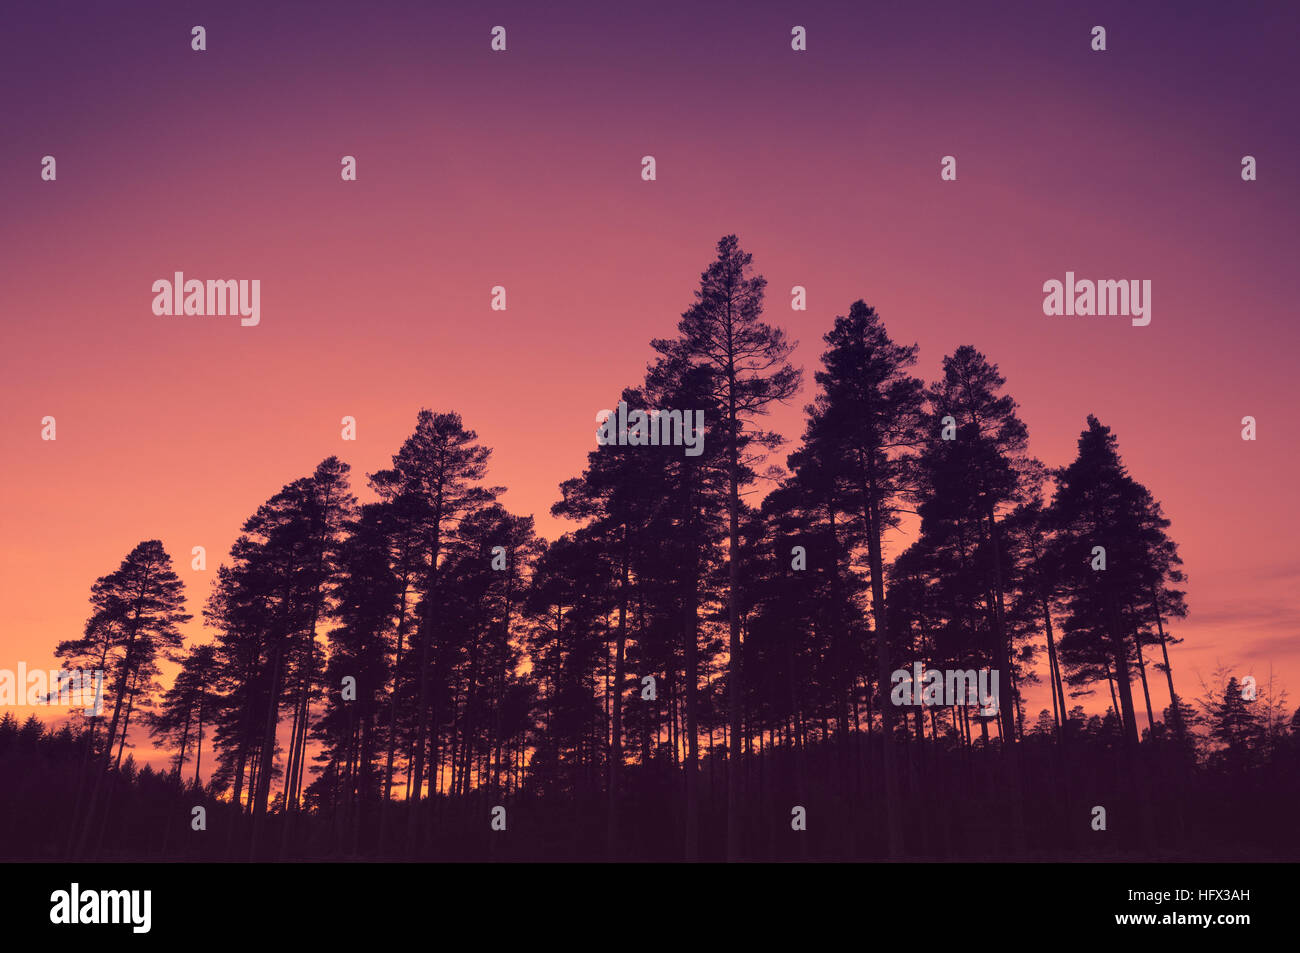 Pine trees in silhouette, New Forest Stock Photo